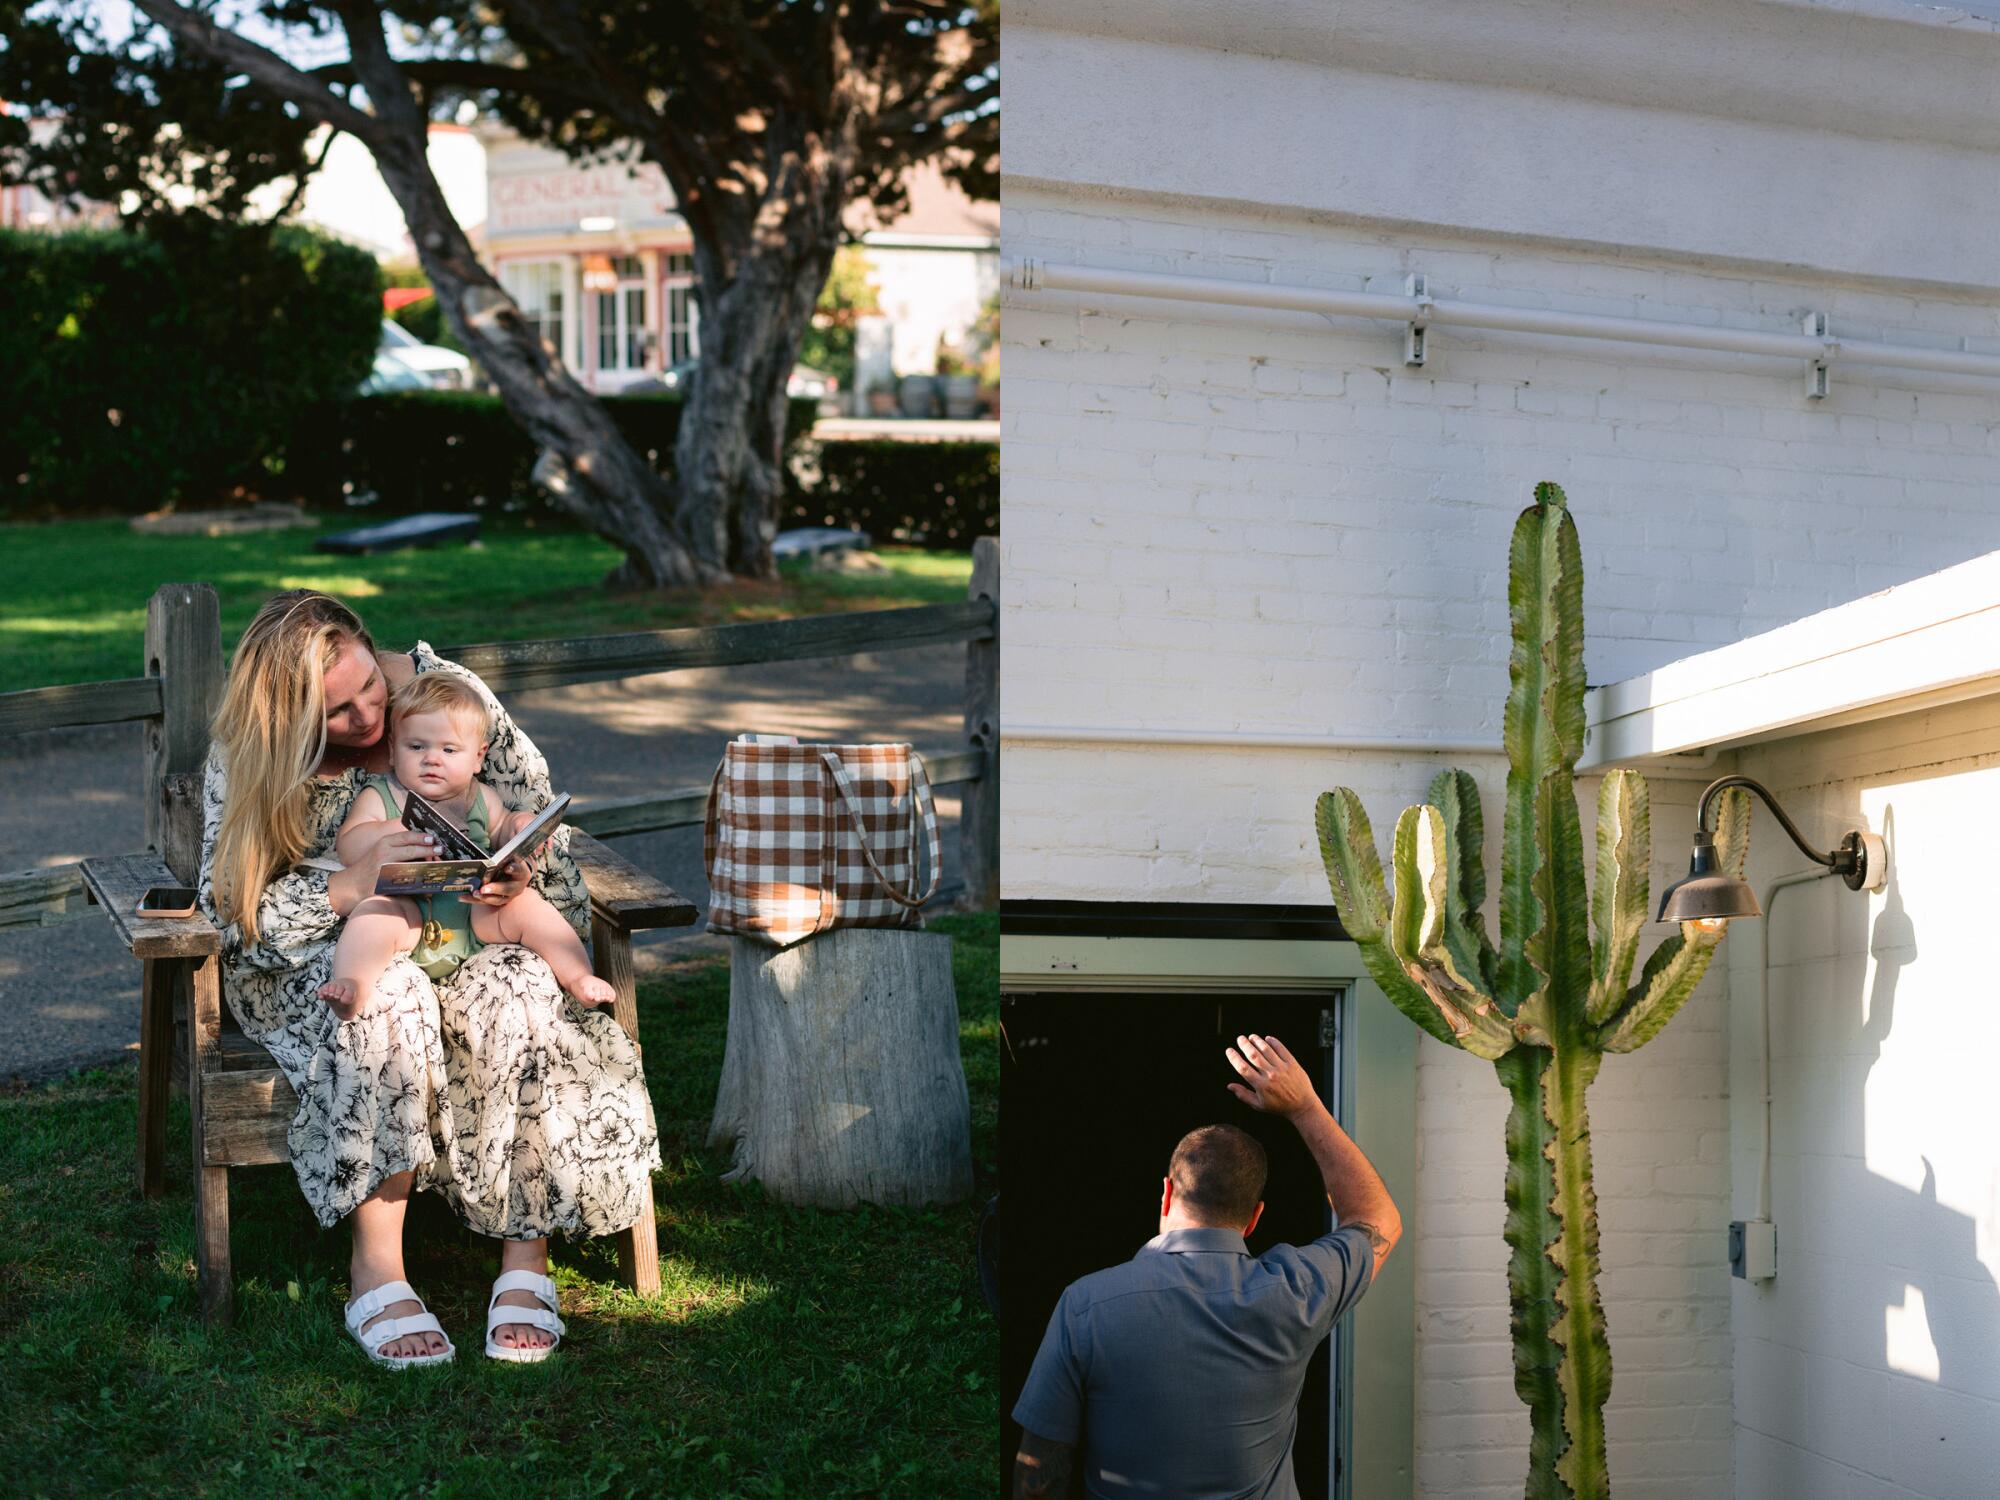 Two photos side by side of a woman reading to a baby, left, and a man, arm raised, walking past a cactus into a doorway.